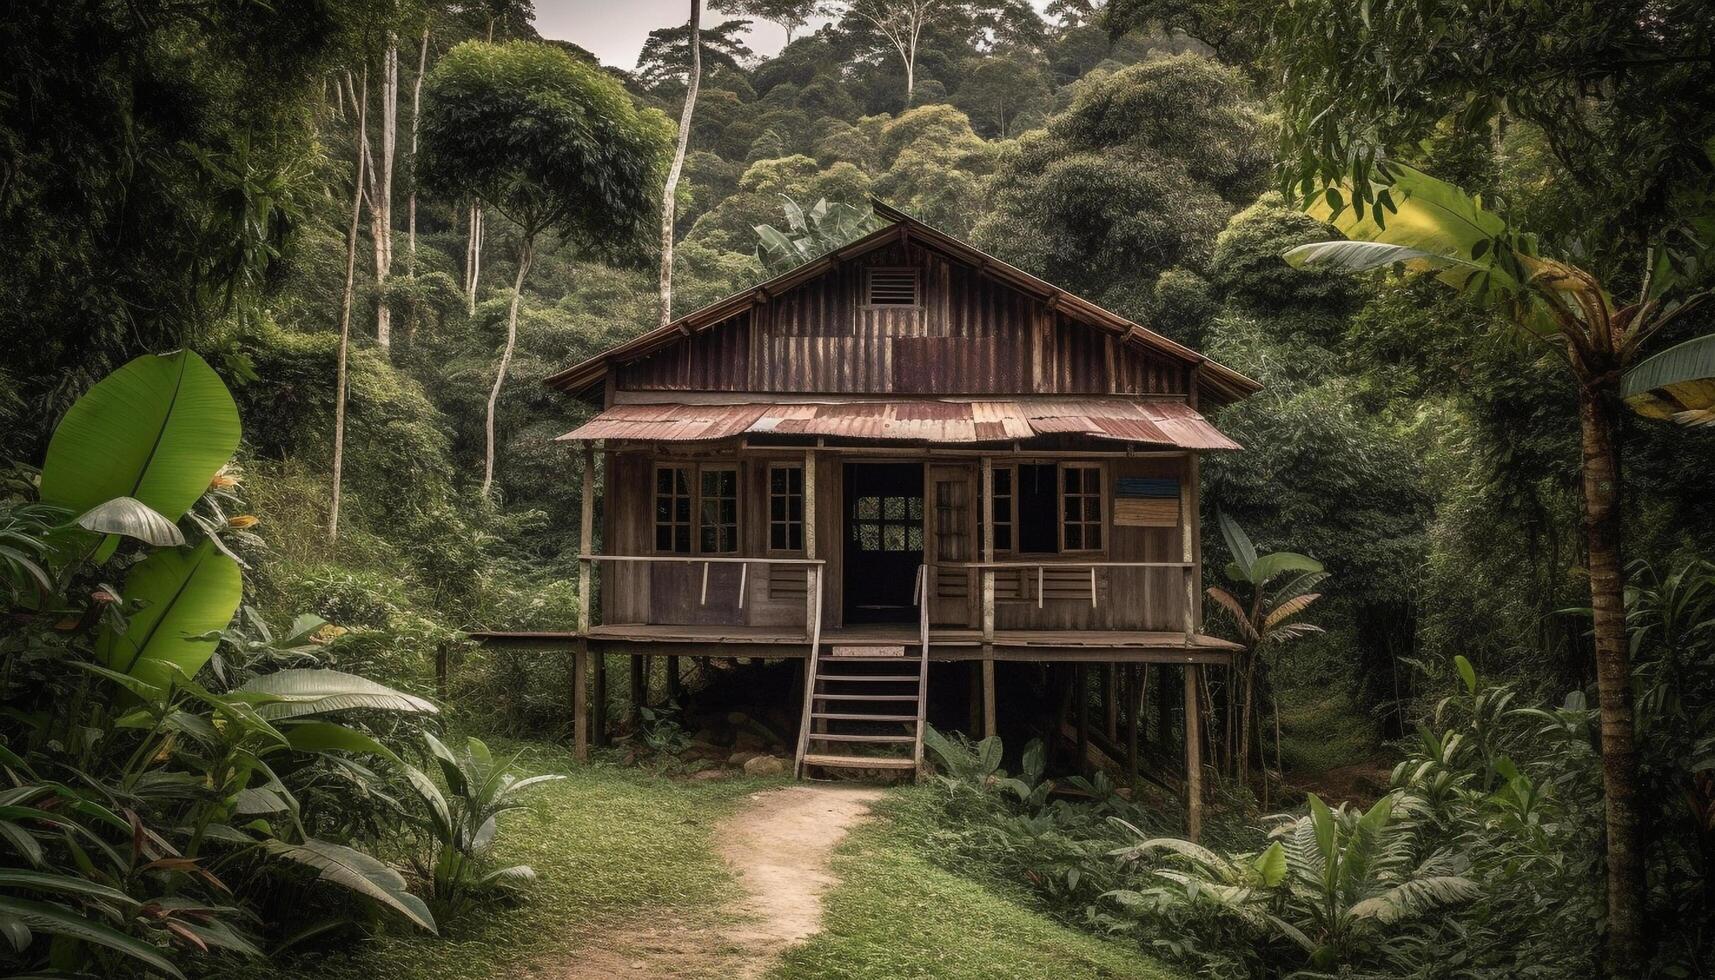 Tropical bungalow nestled in lush rainforest landscape generated by AI photo